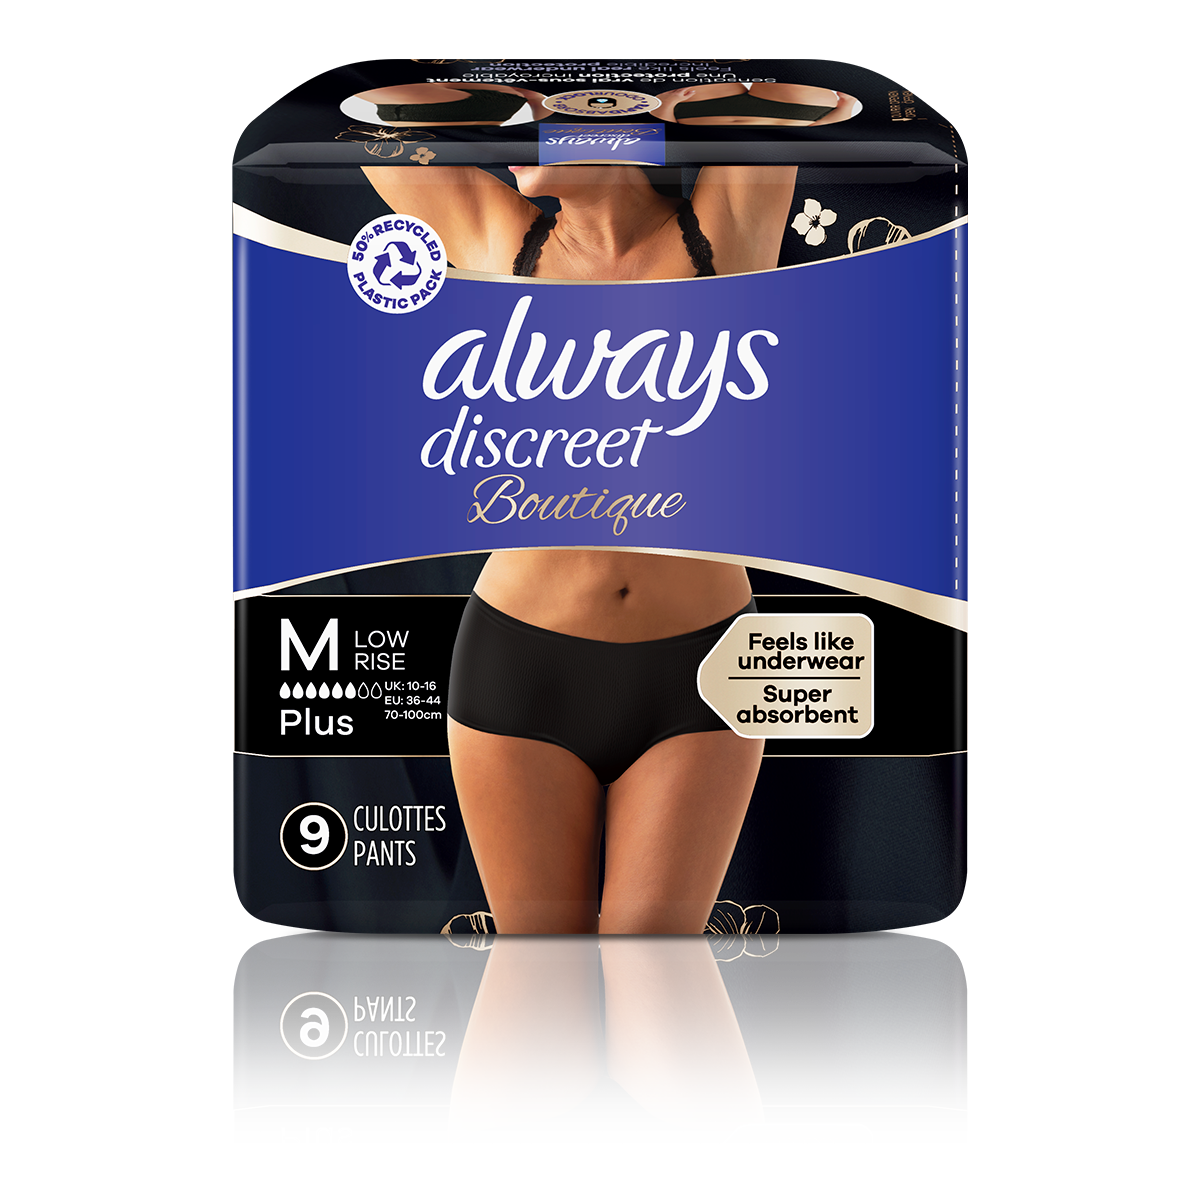 Always Discreet Boutique Incontinence Pants Low-Rise Black (8) - Compare  Prices & Where To Buy 